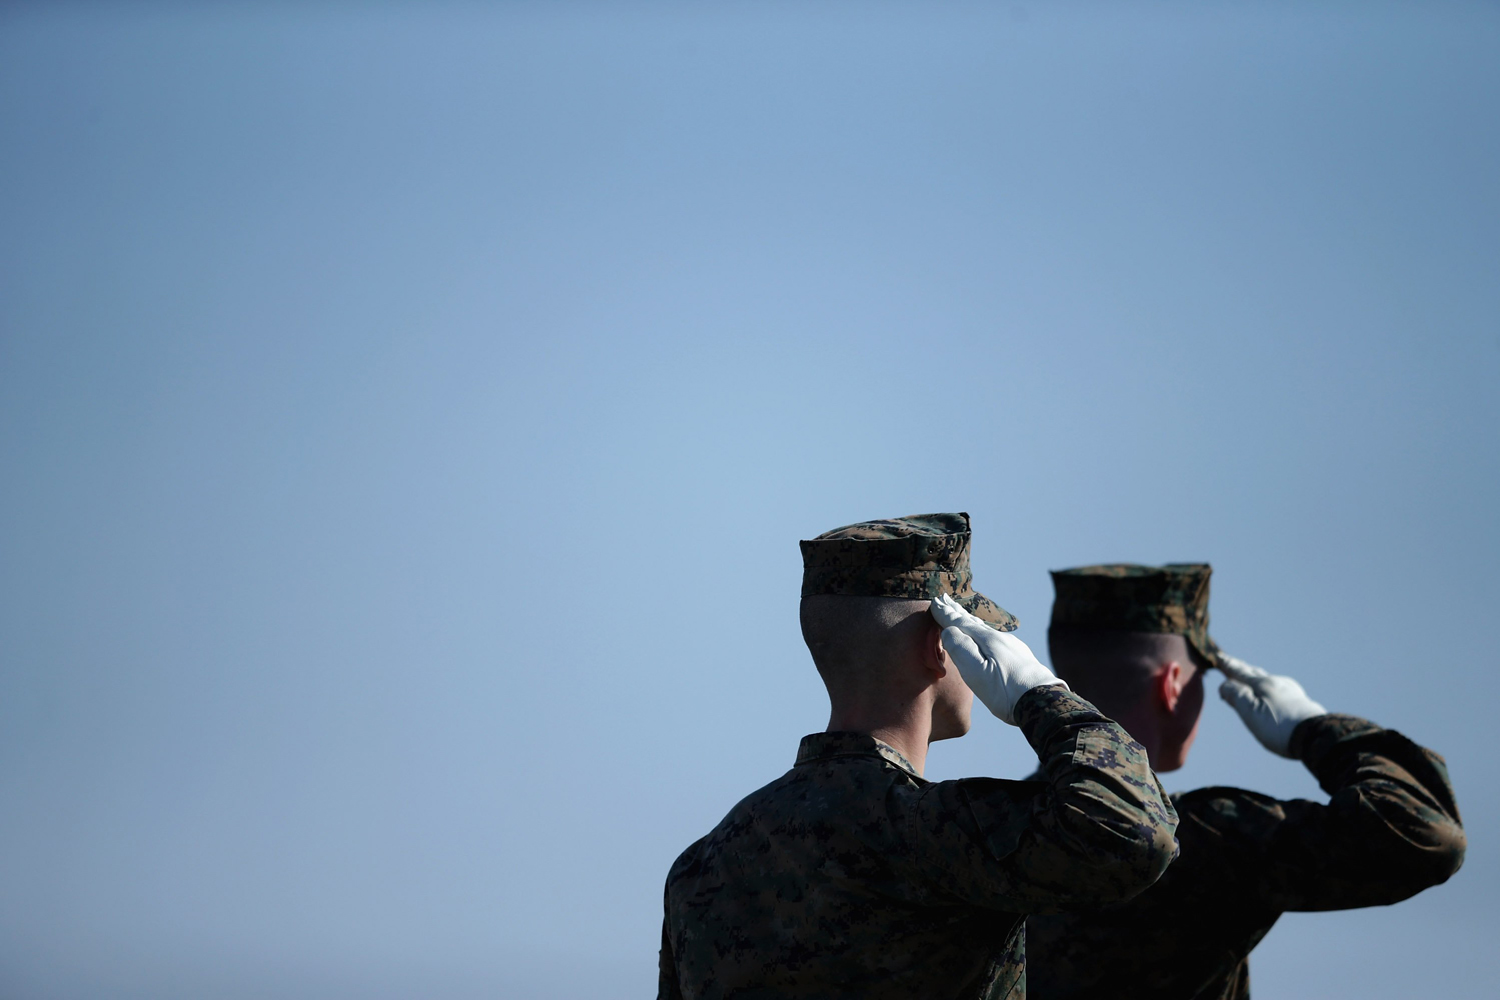 Body Of Marine Killed In Afghanistan Returned To U.S. At Dover Air Force Base